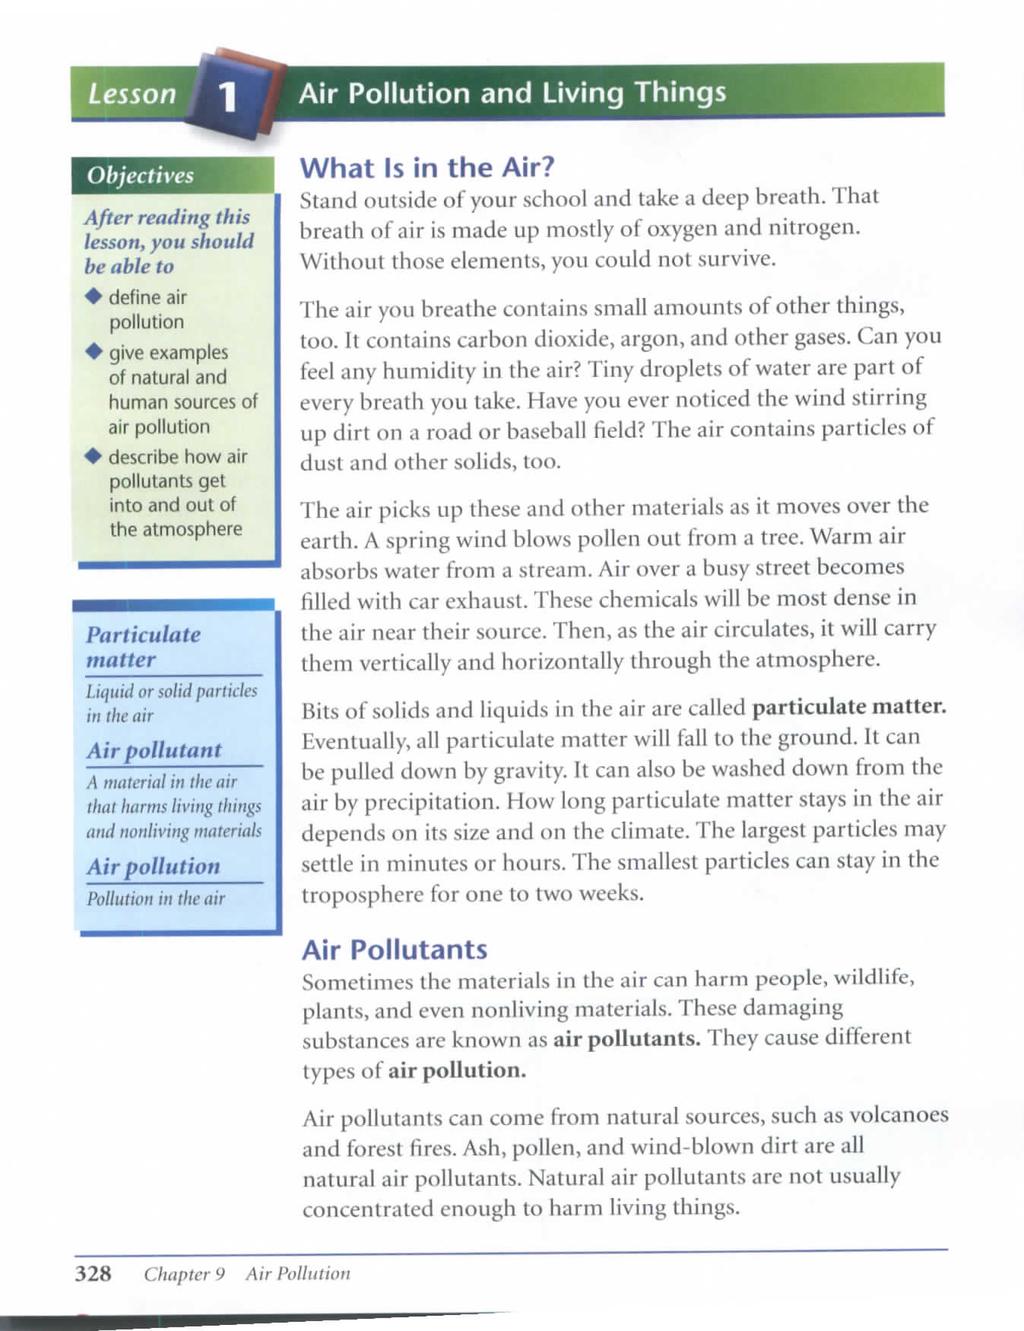 Lesson Air Pollution and Living Things Objectives After reading this lesson, you should he able to + define air pollution + give examples of natural and human sources of air pollution + describe how